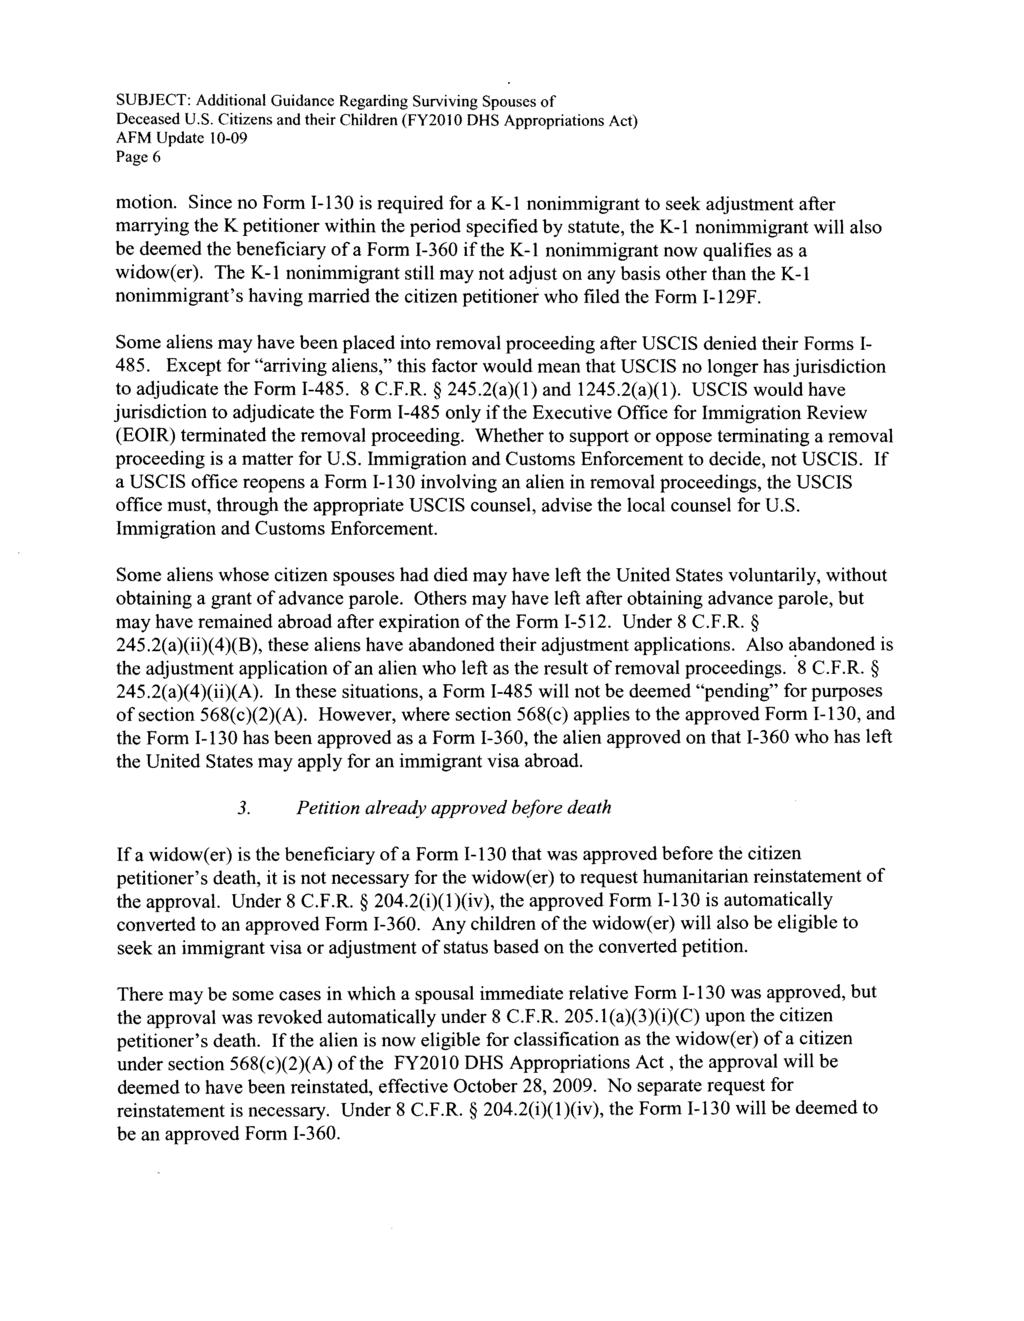 Deceased U.S. Citizens and their Children (FY201 0 DHS Appropriations Act) Page 6 motion.